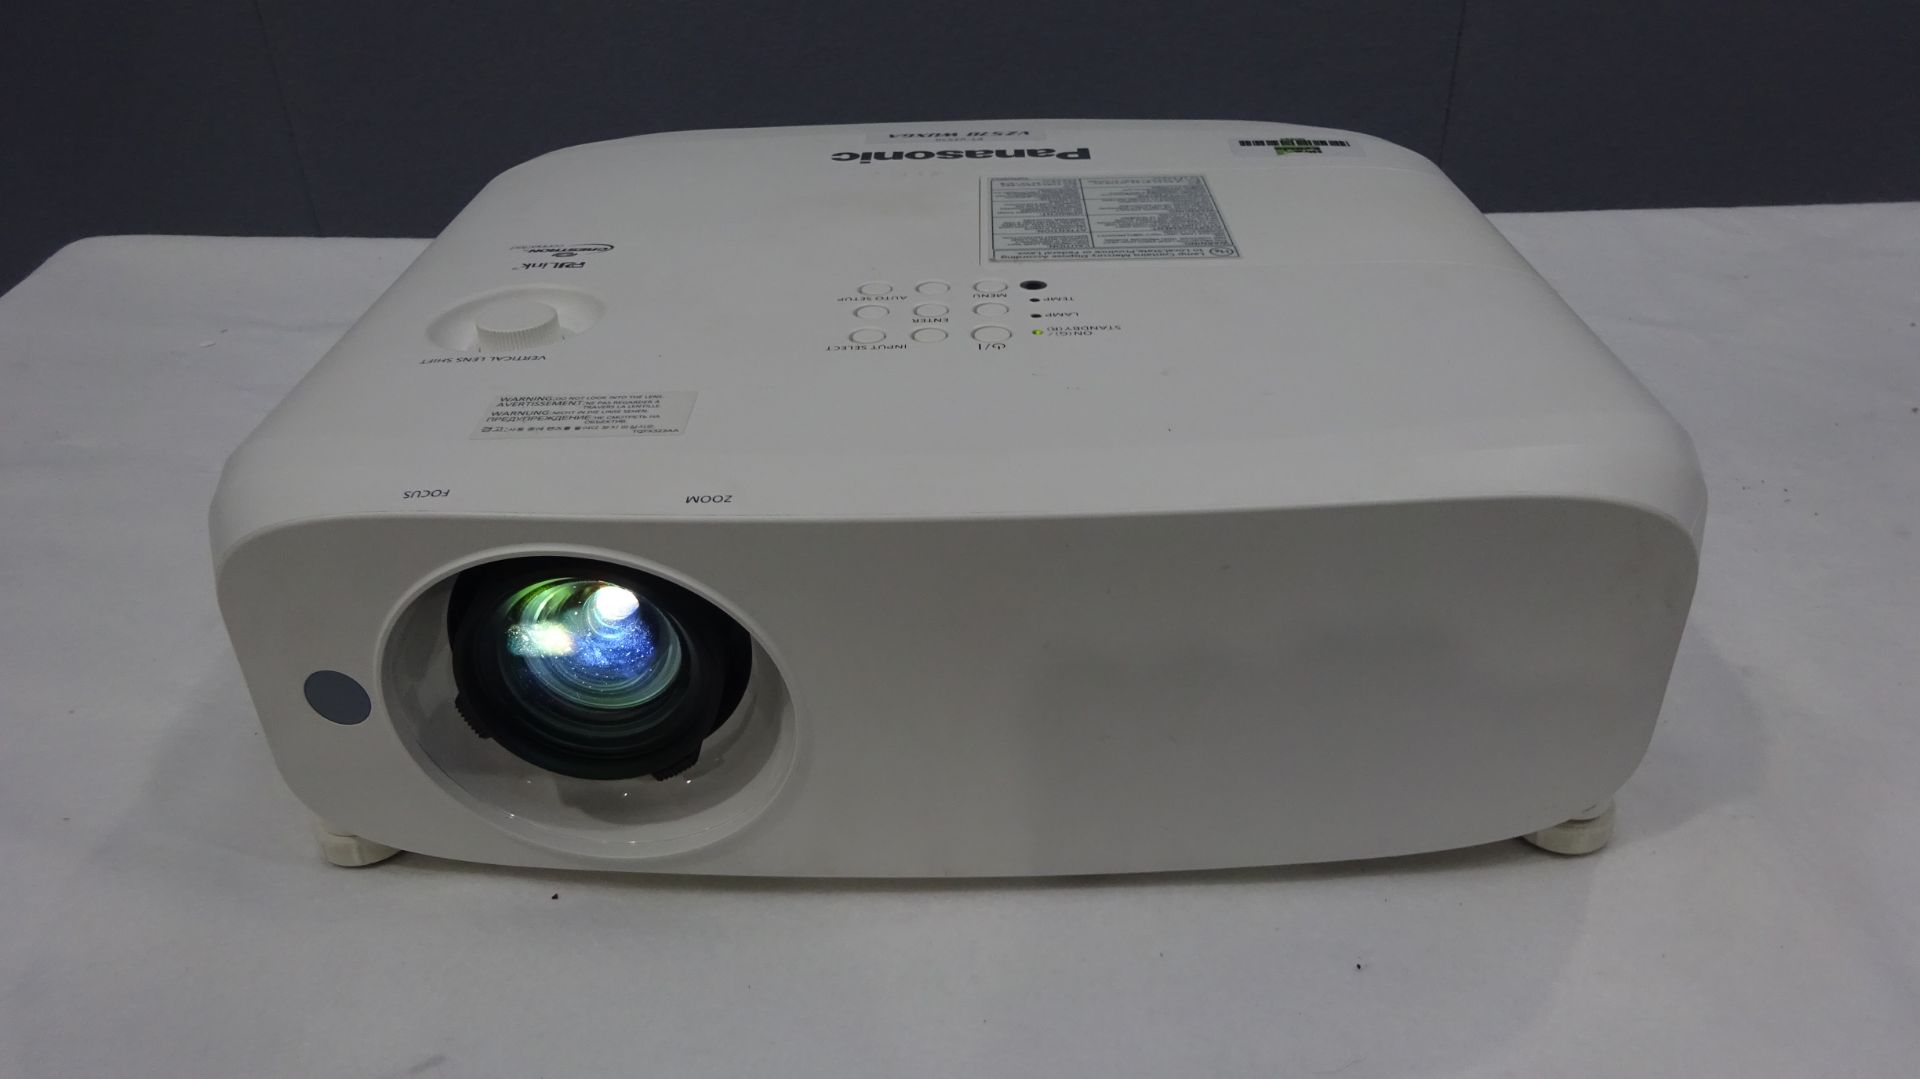 Panasonic PT-VZ570 WUXGA 4800 Lumens LCD Projector Running time ONLY 746 hrs and the lamp time ONLY